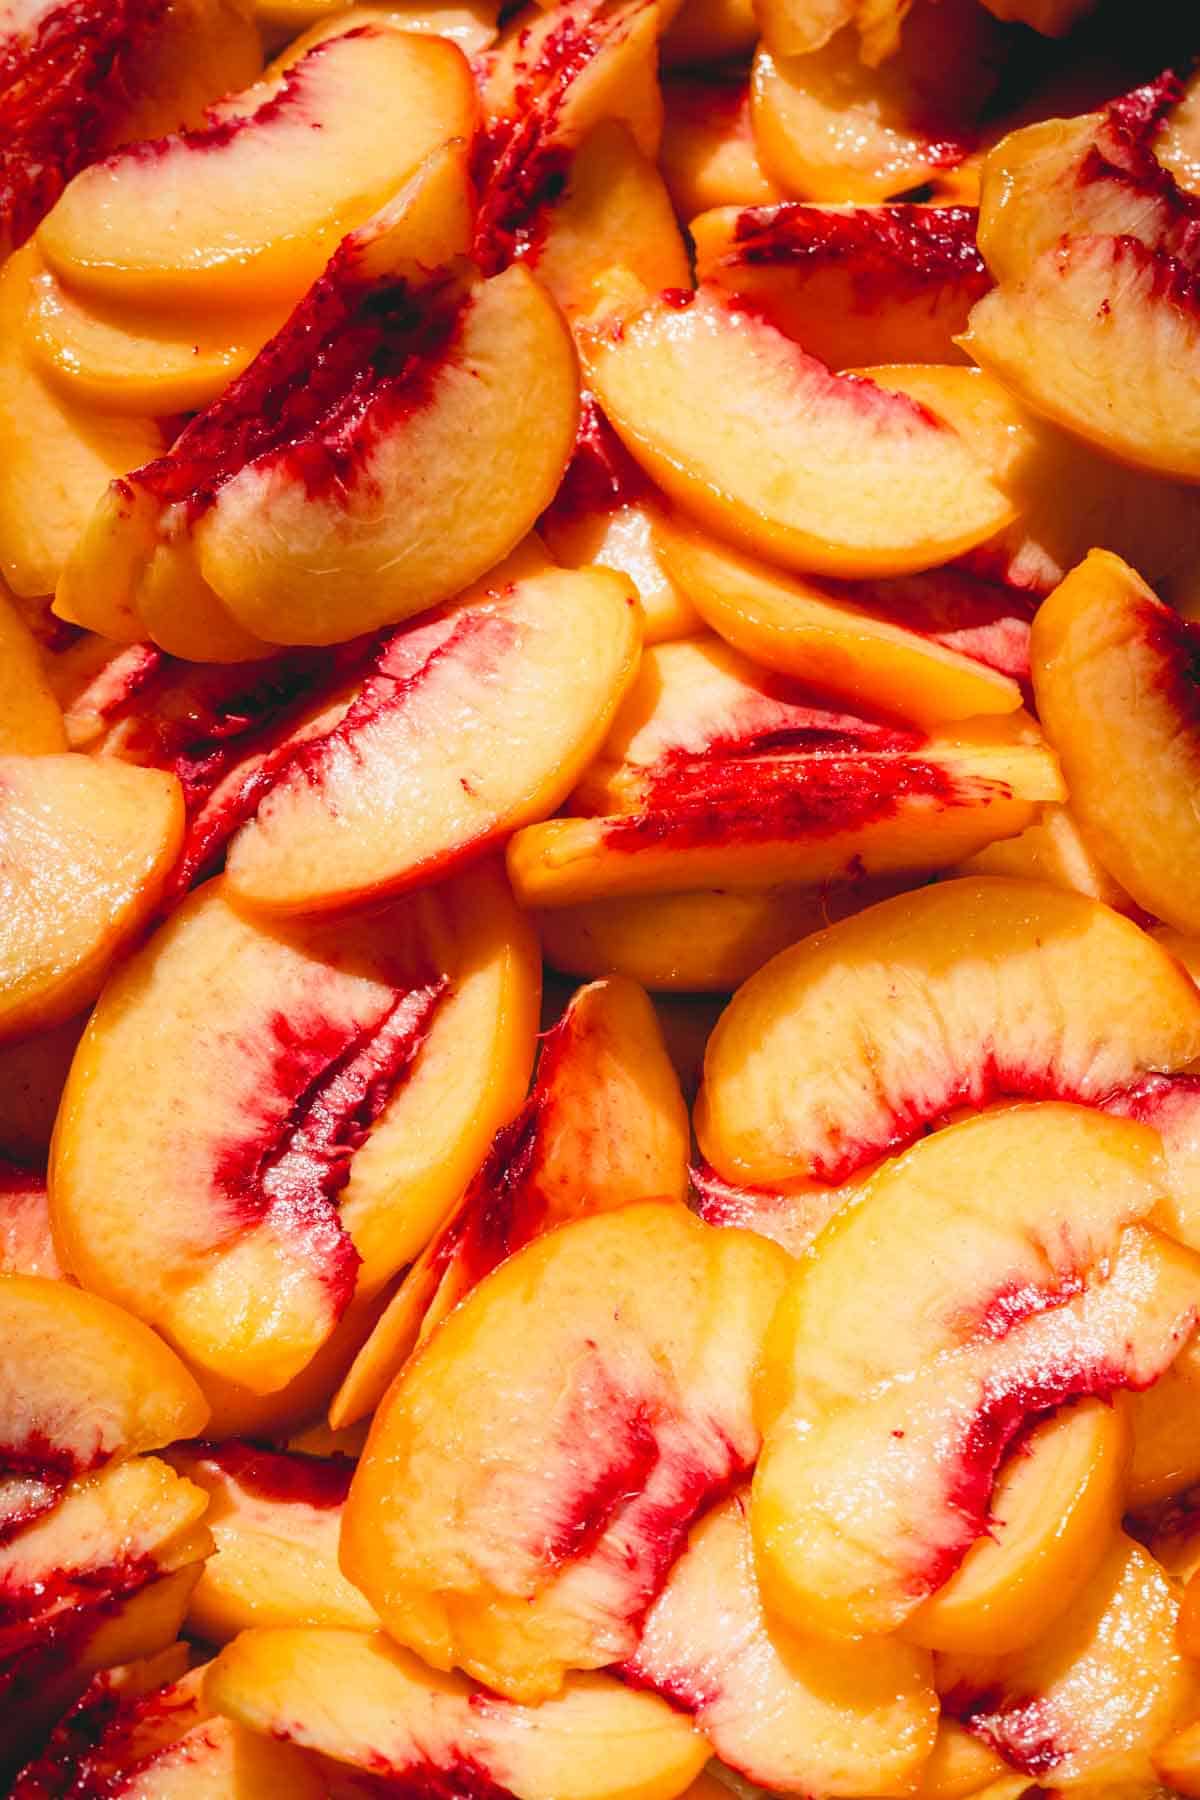 Close up image of peach slices.